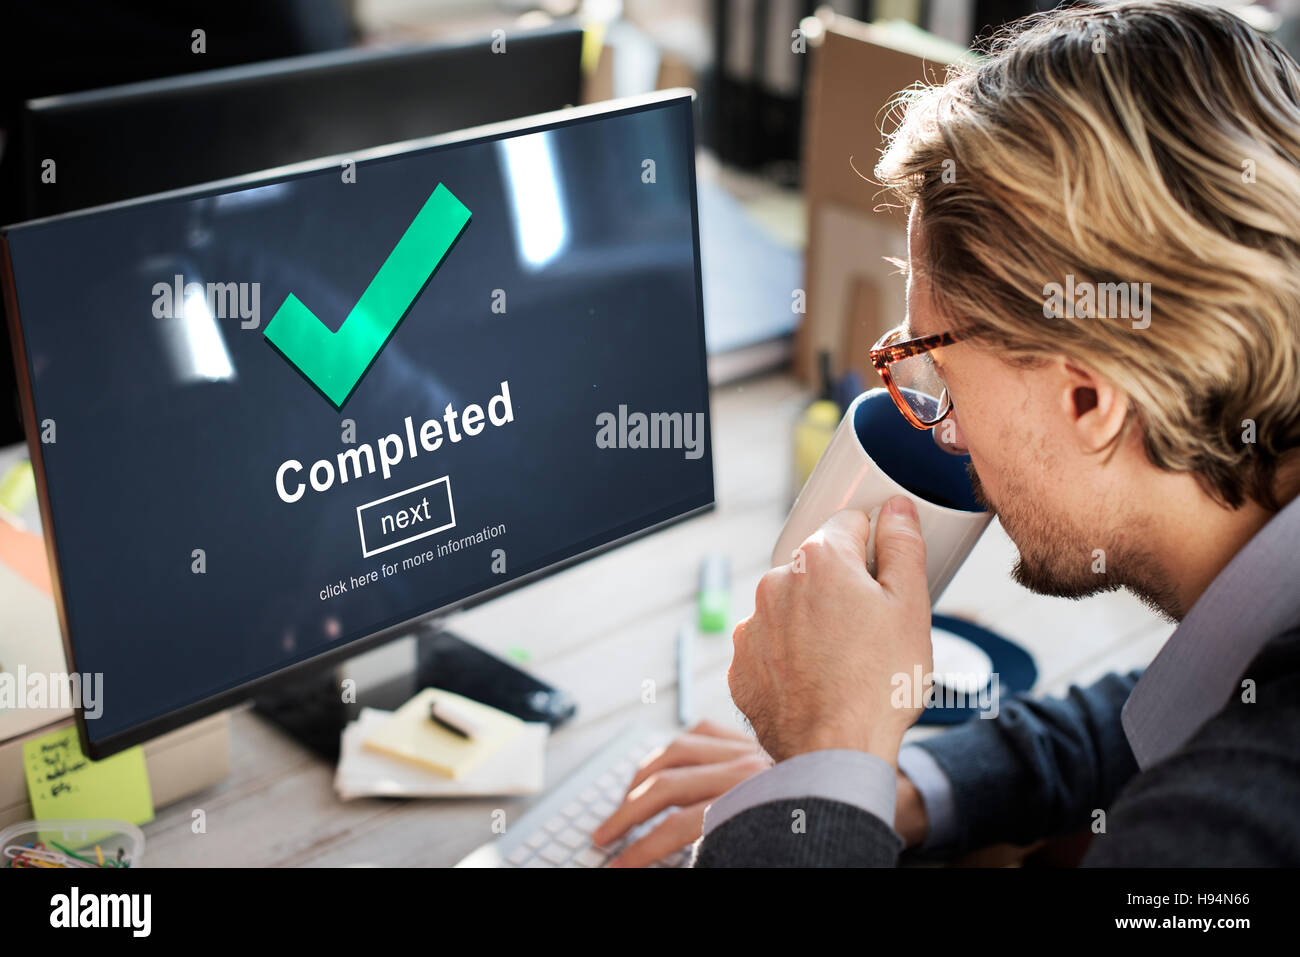 Completed Accomplishment Achievement Finished Success Concept Stock Photo